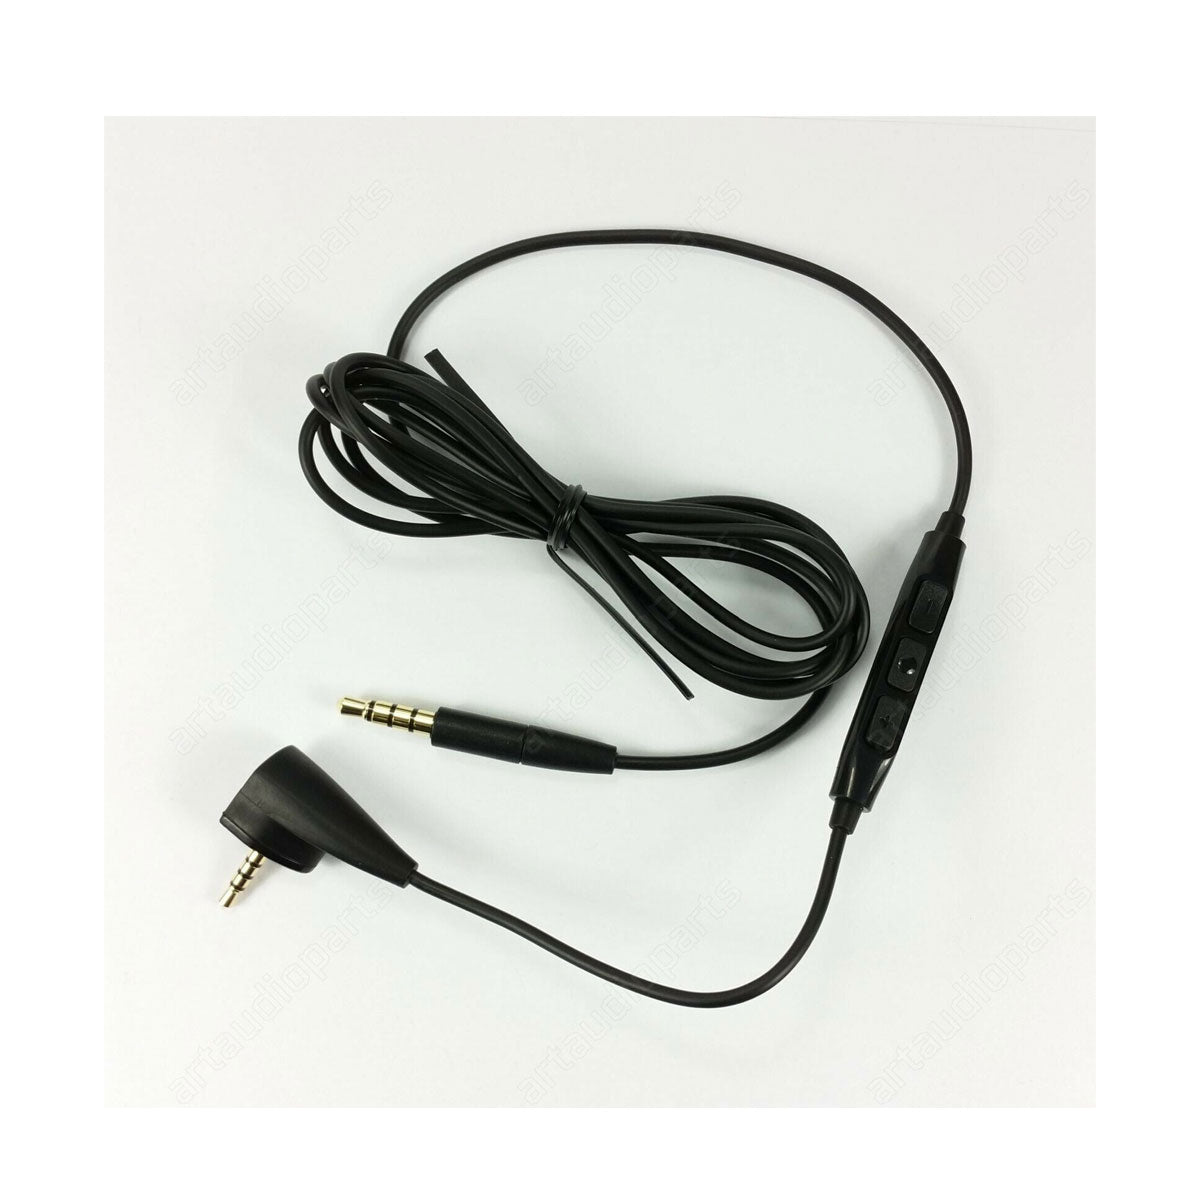 Sennheiser Spares - Connecting Cable I HD461/471